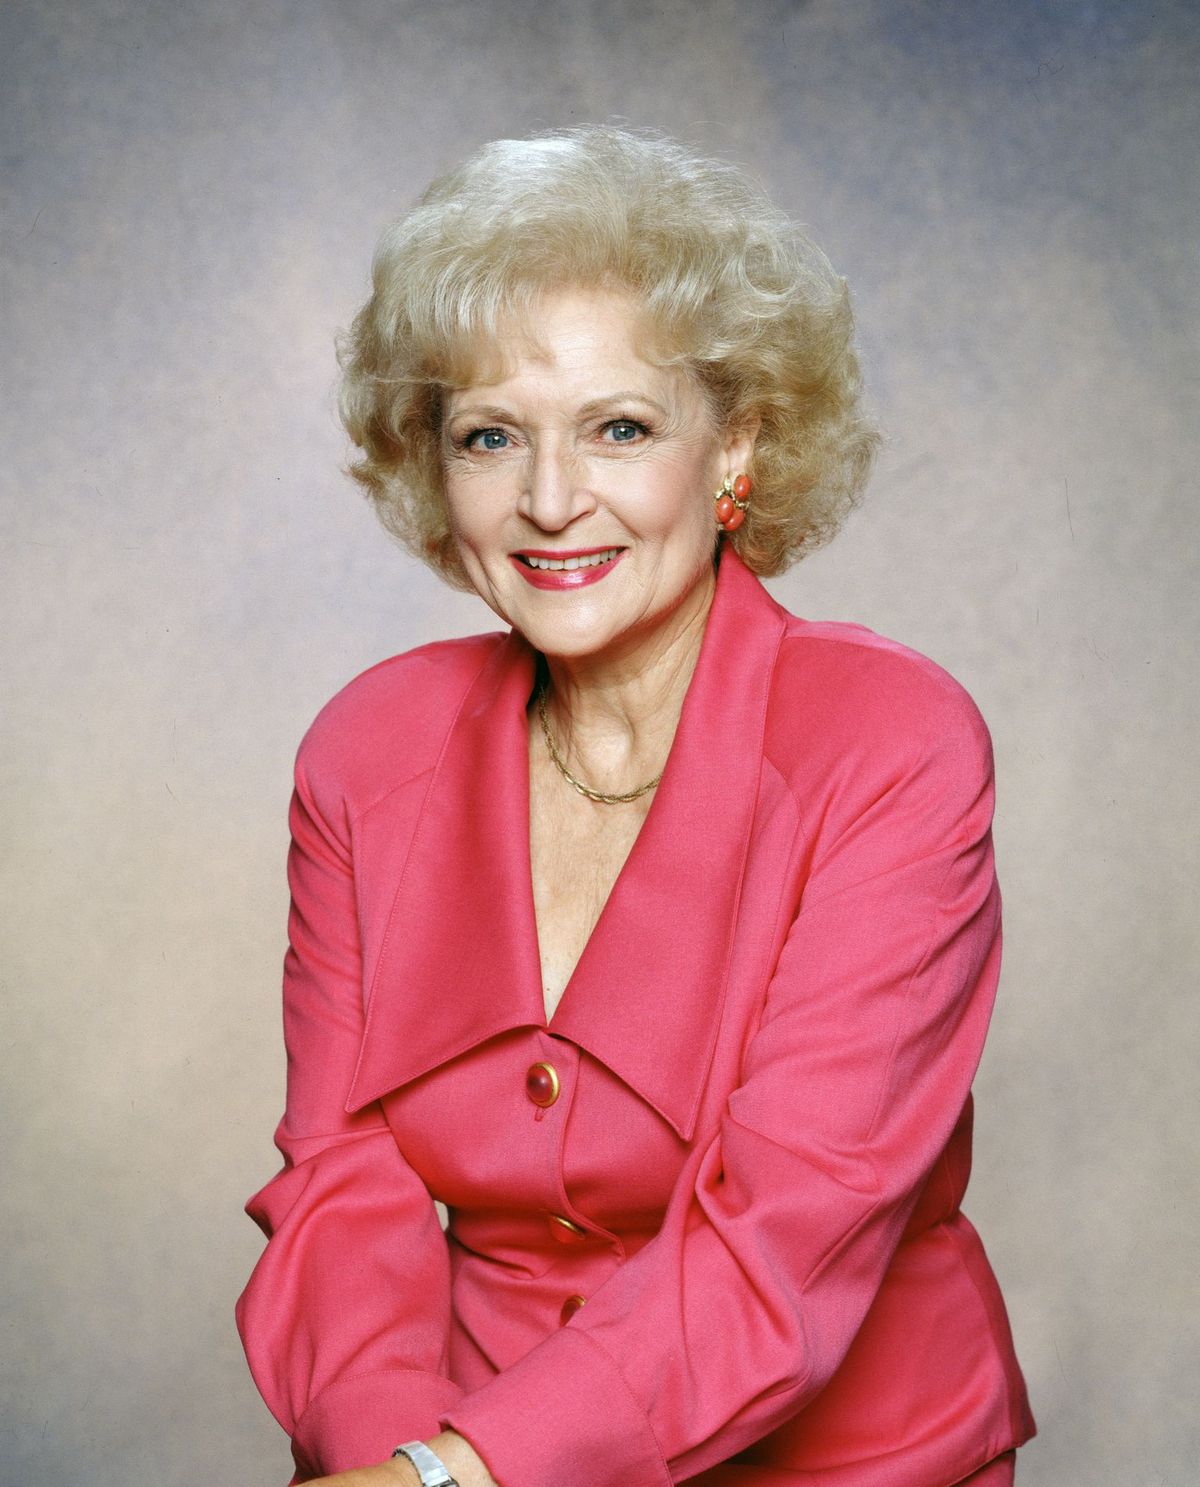 Betty White as Rose Nylund on "The Golden Palace" on January 01, 1992 | Photo: CBS/Getty Images